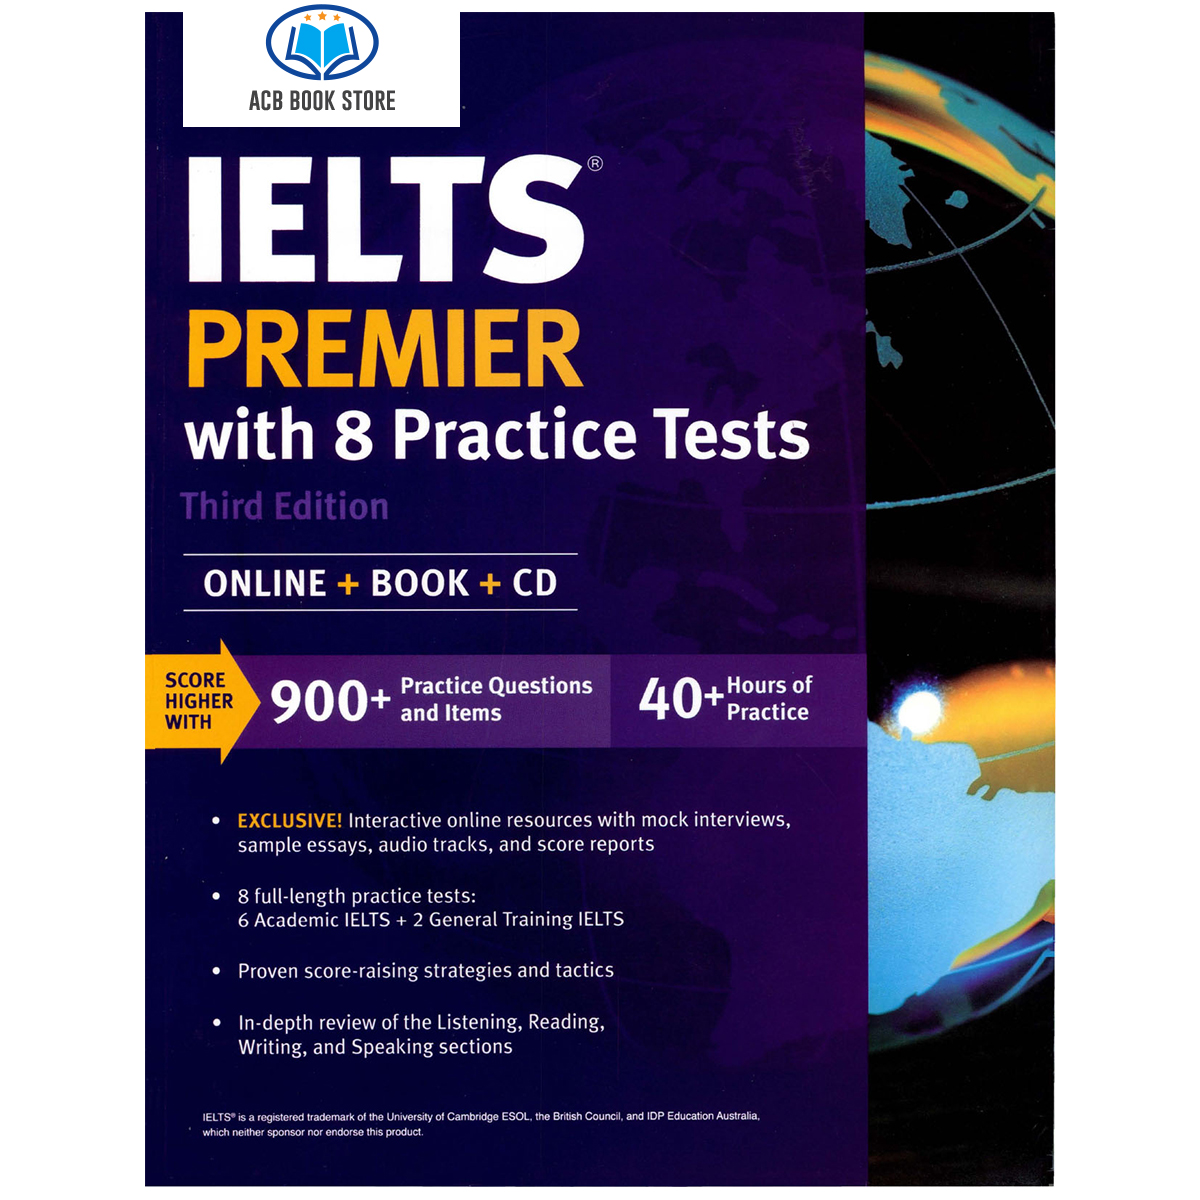 Sách IELTS Premier with 8 Practice Tests - ACB Bookstore